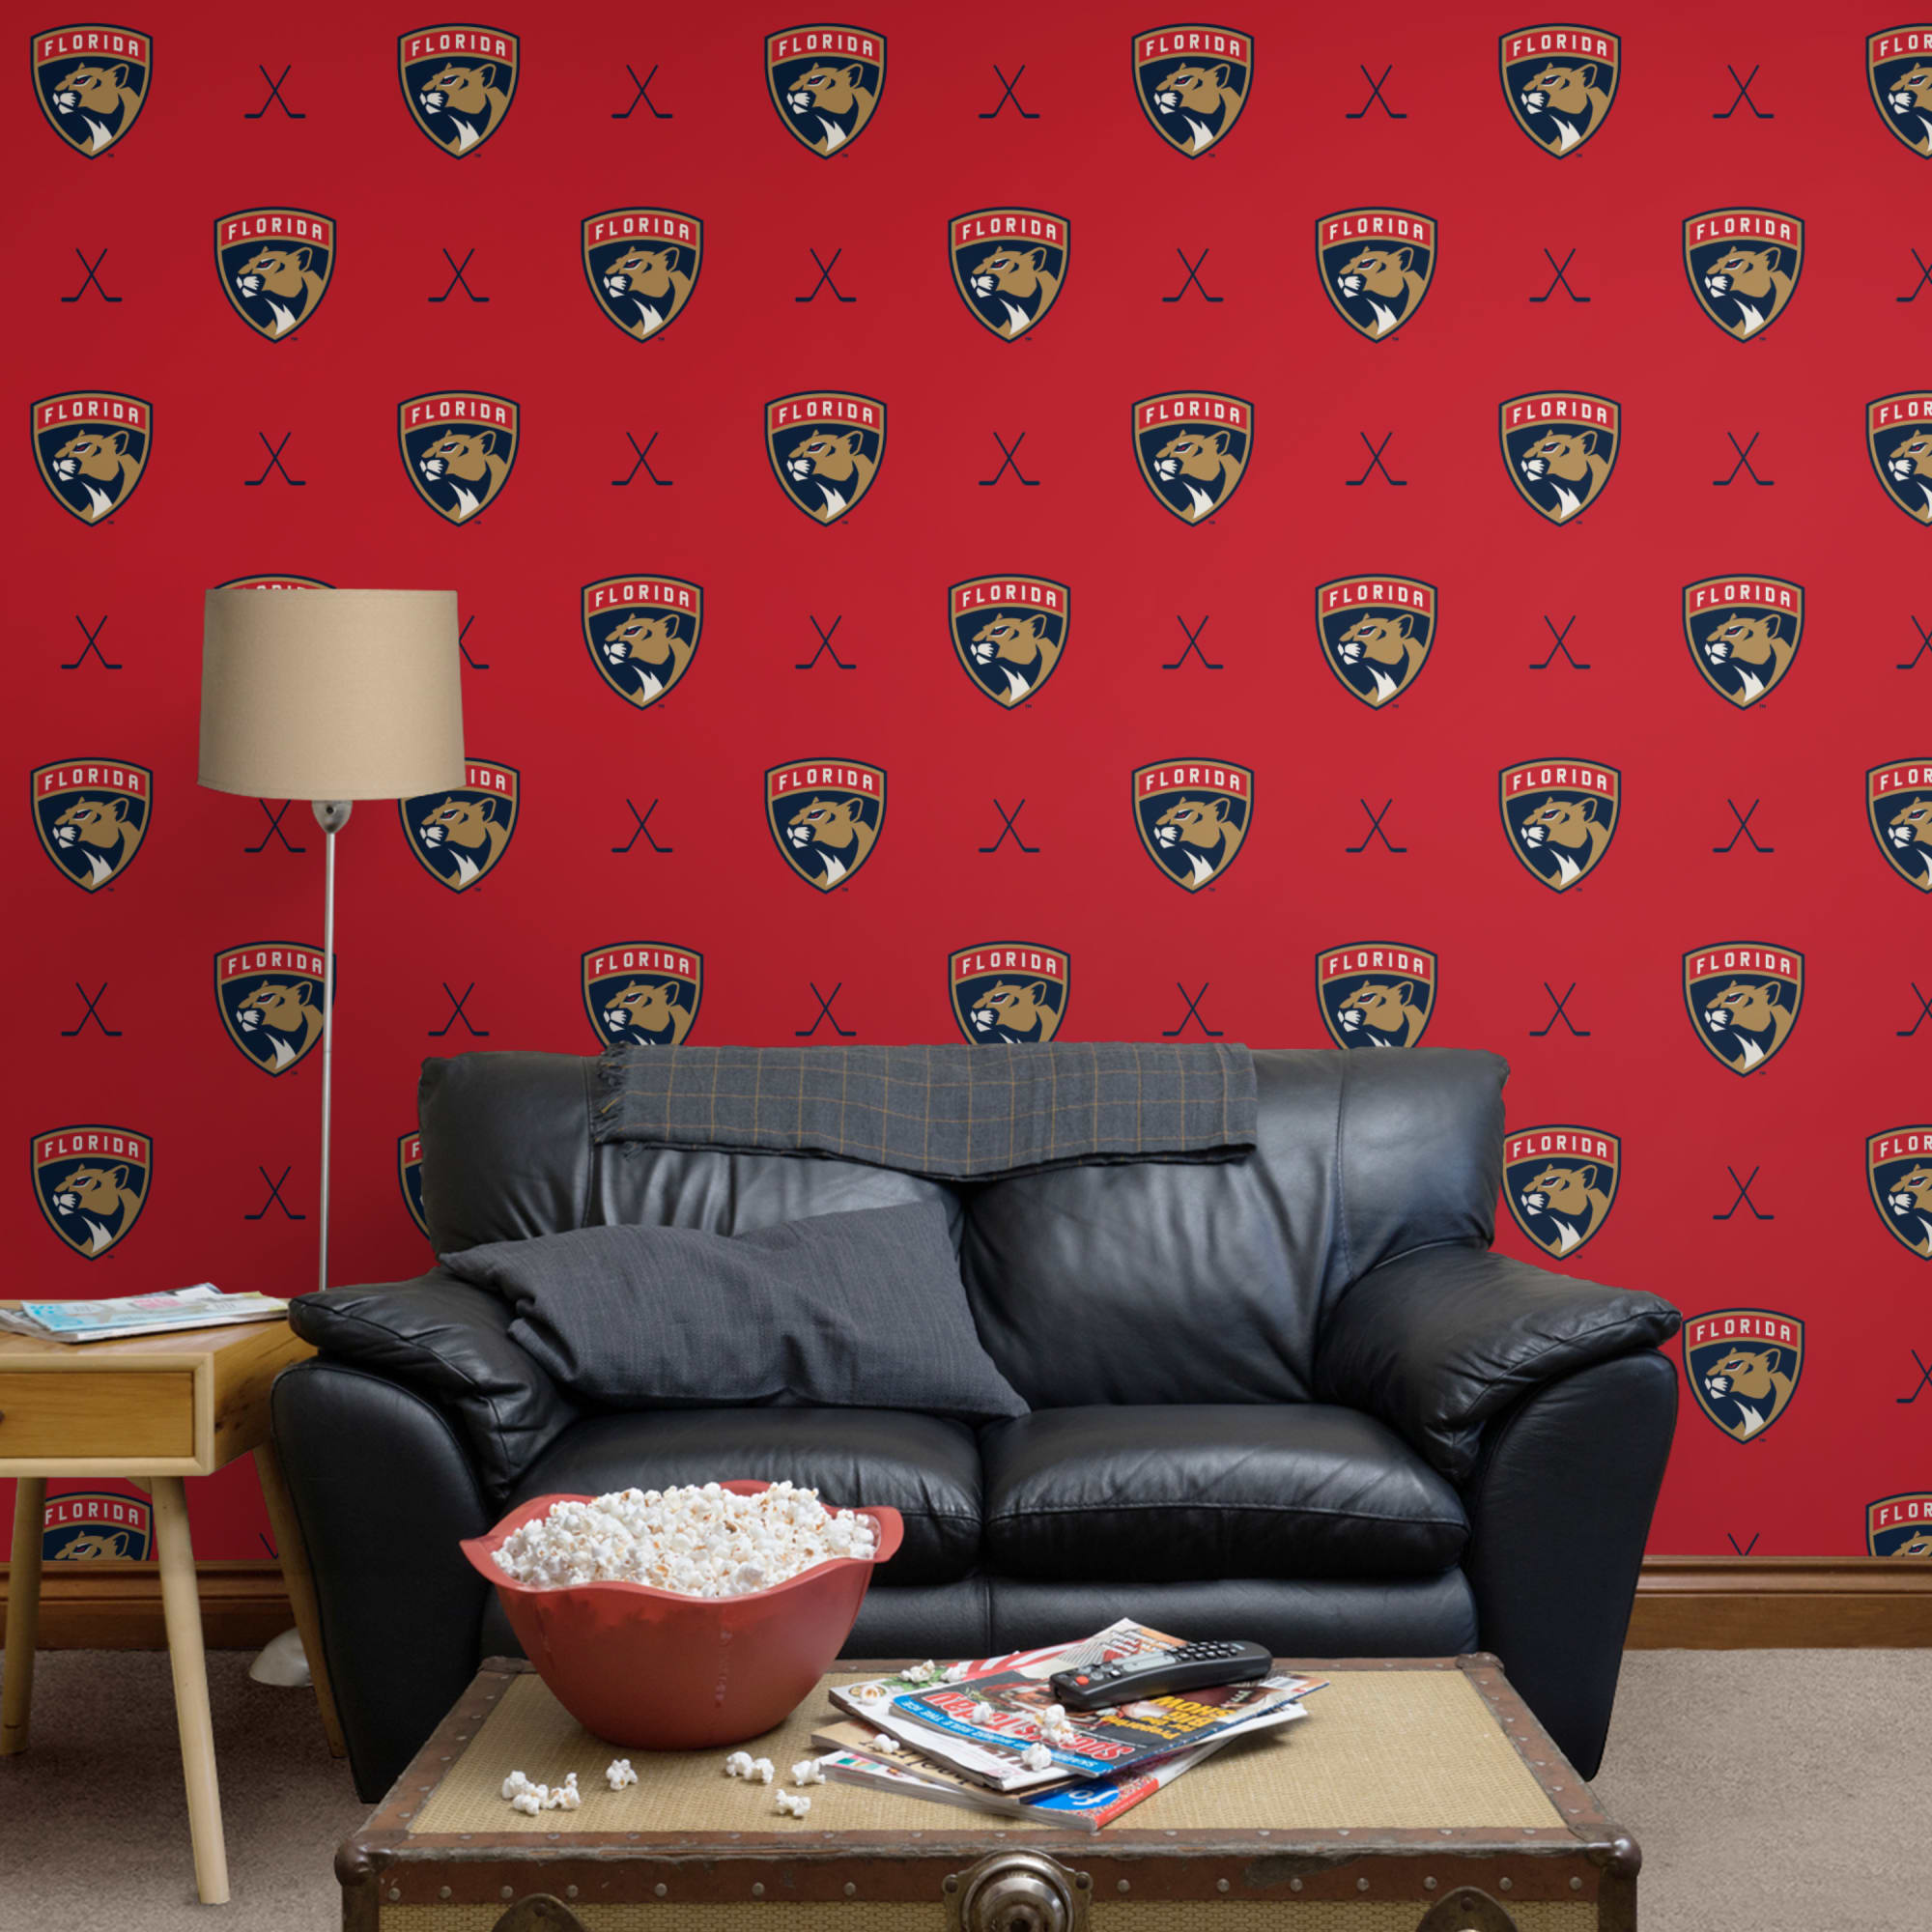 Florida Panthers: Sticks Pattern - Officially Licensed NHL Removable Wallpaper 12" x 12" Sample by Fathead | 100% Vinyl